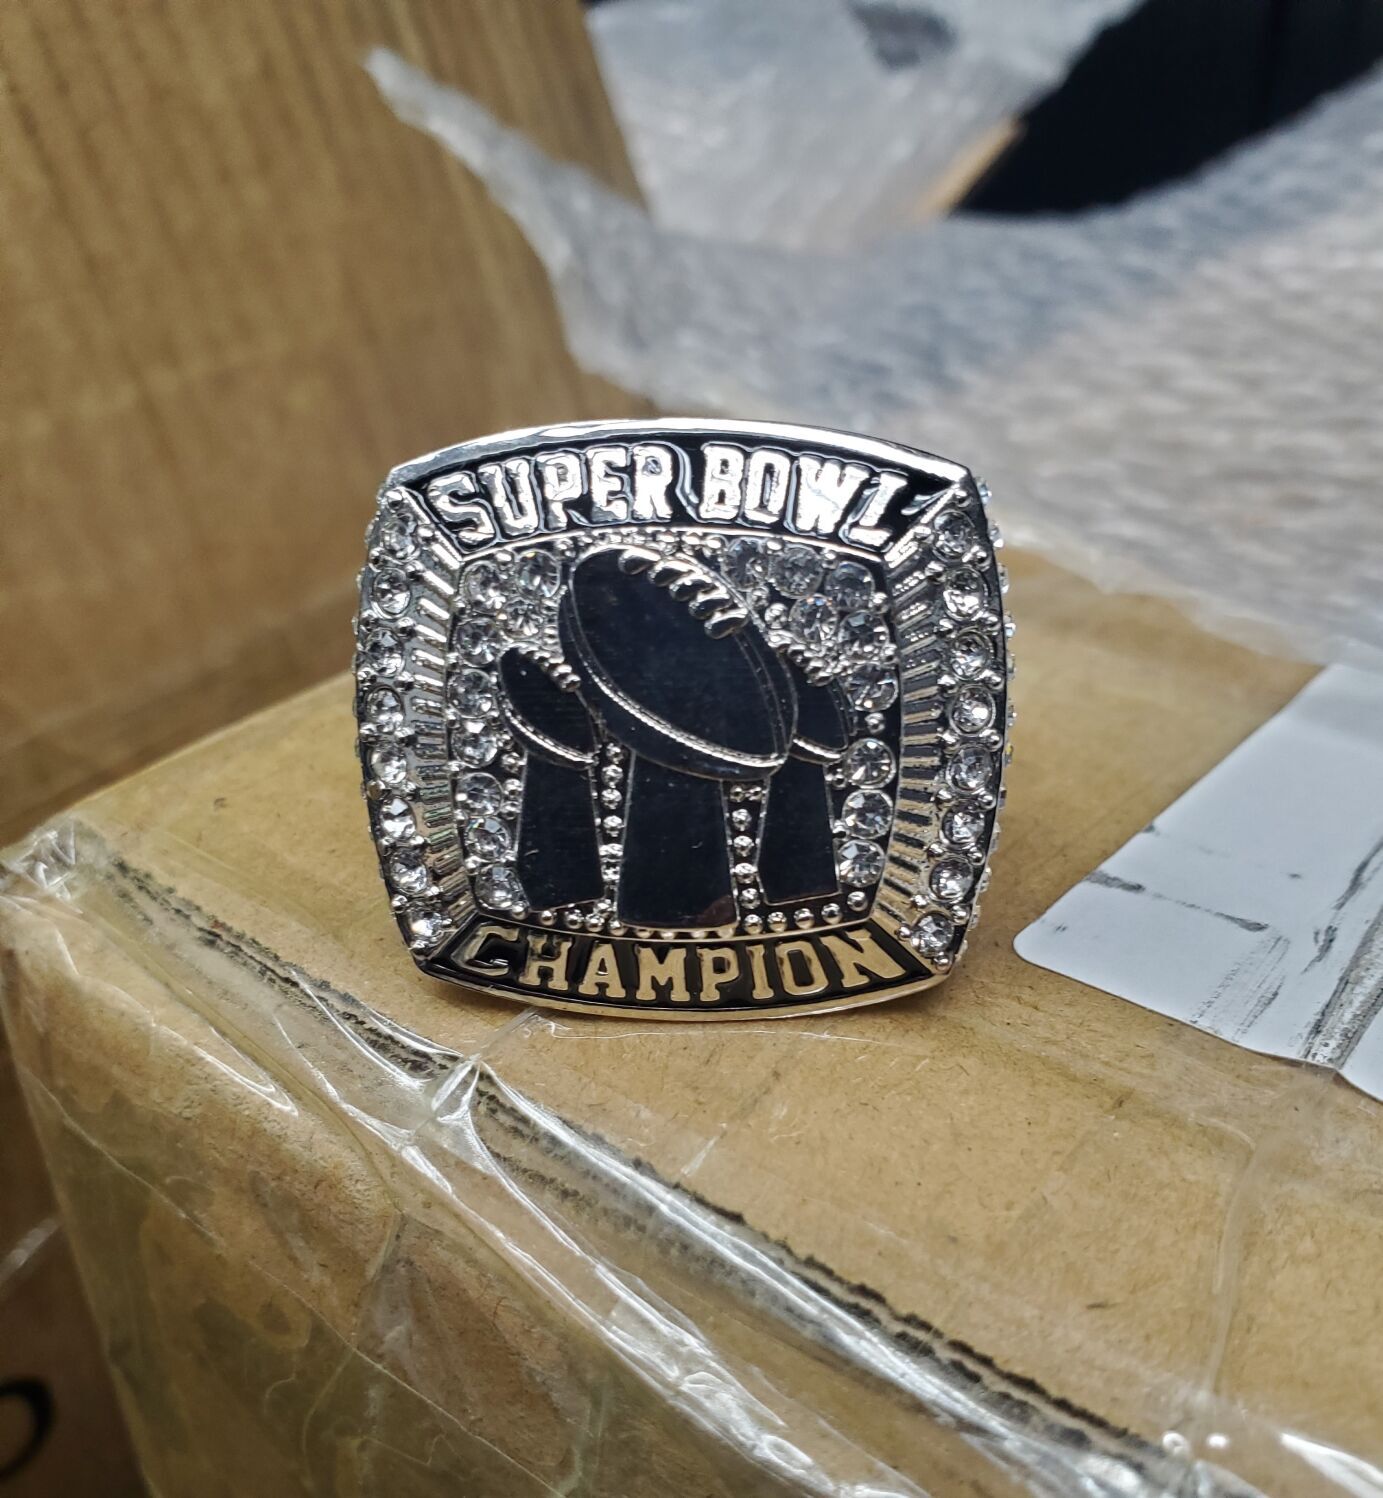 Youth Super Bowl Rings: Customize with Logo & Team at $29.99 ea